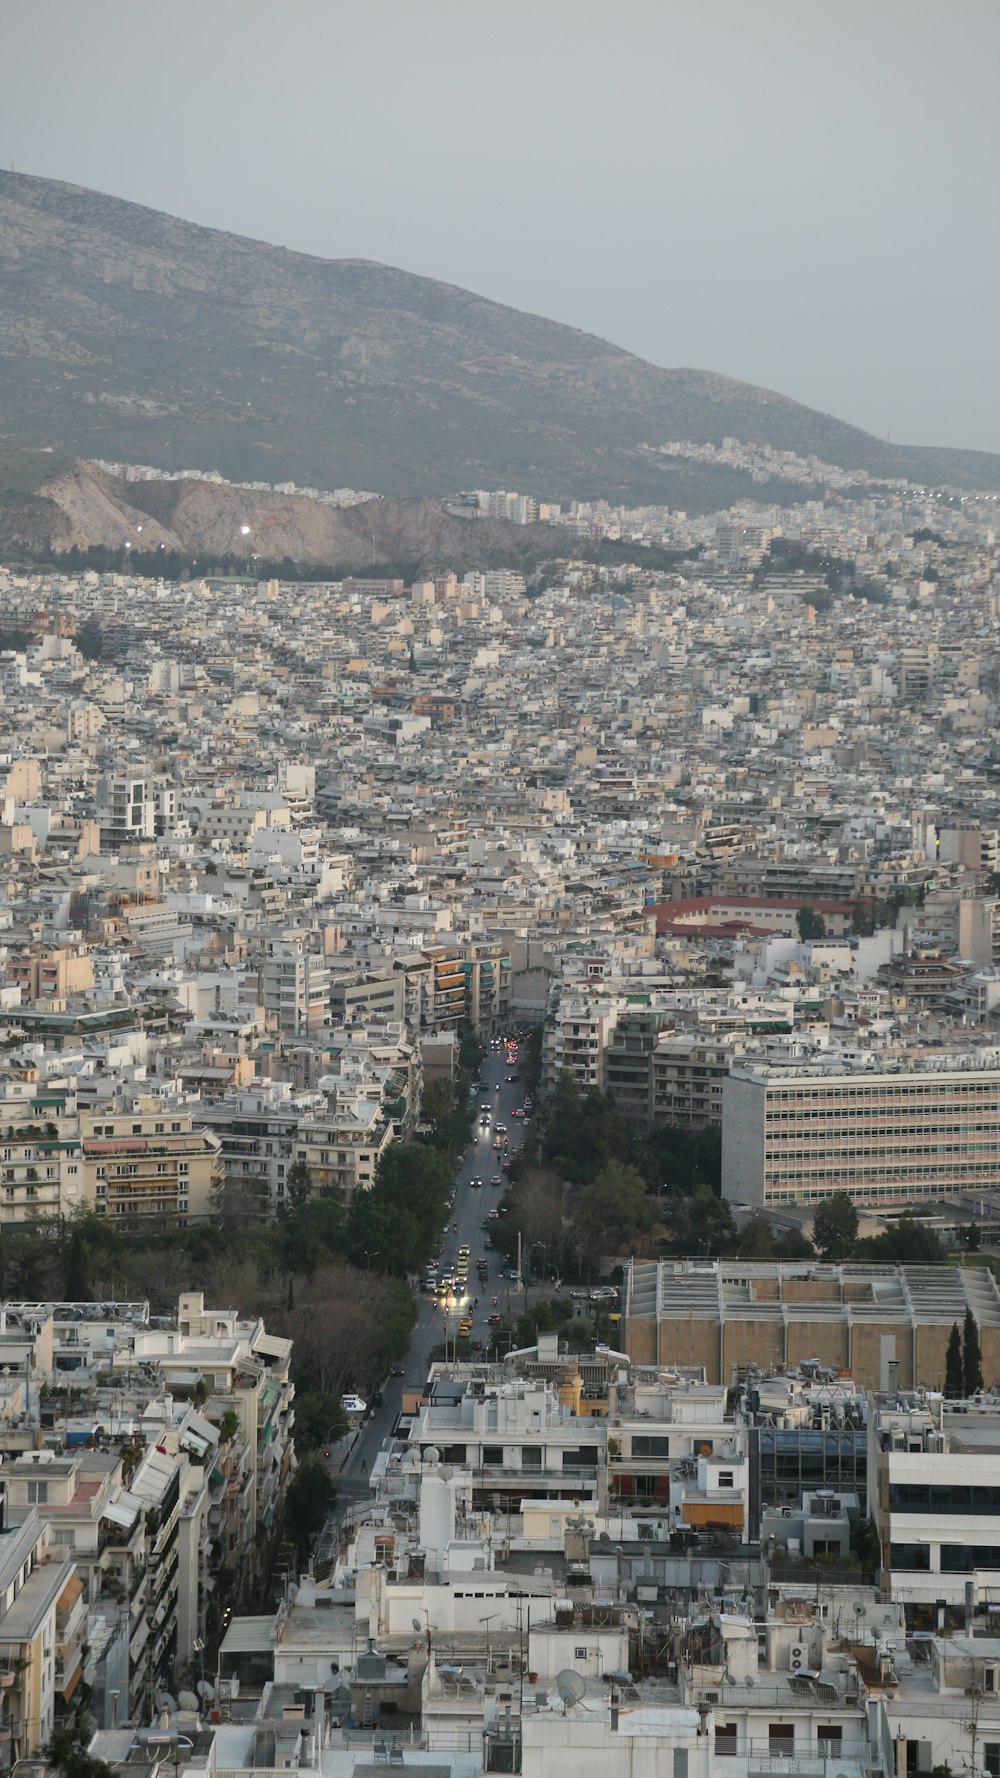 a view of a city with a hill in the background